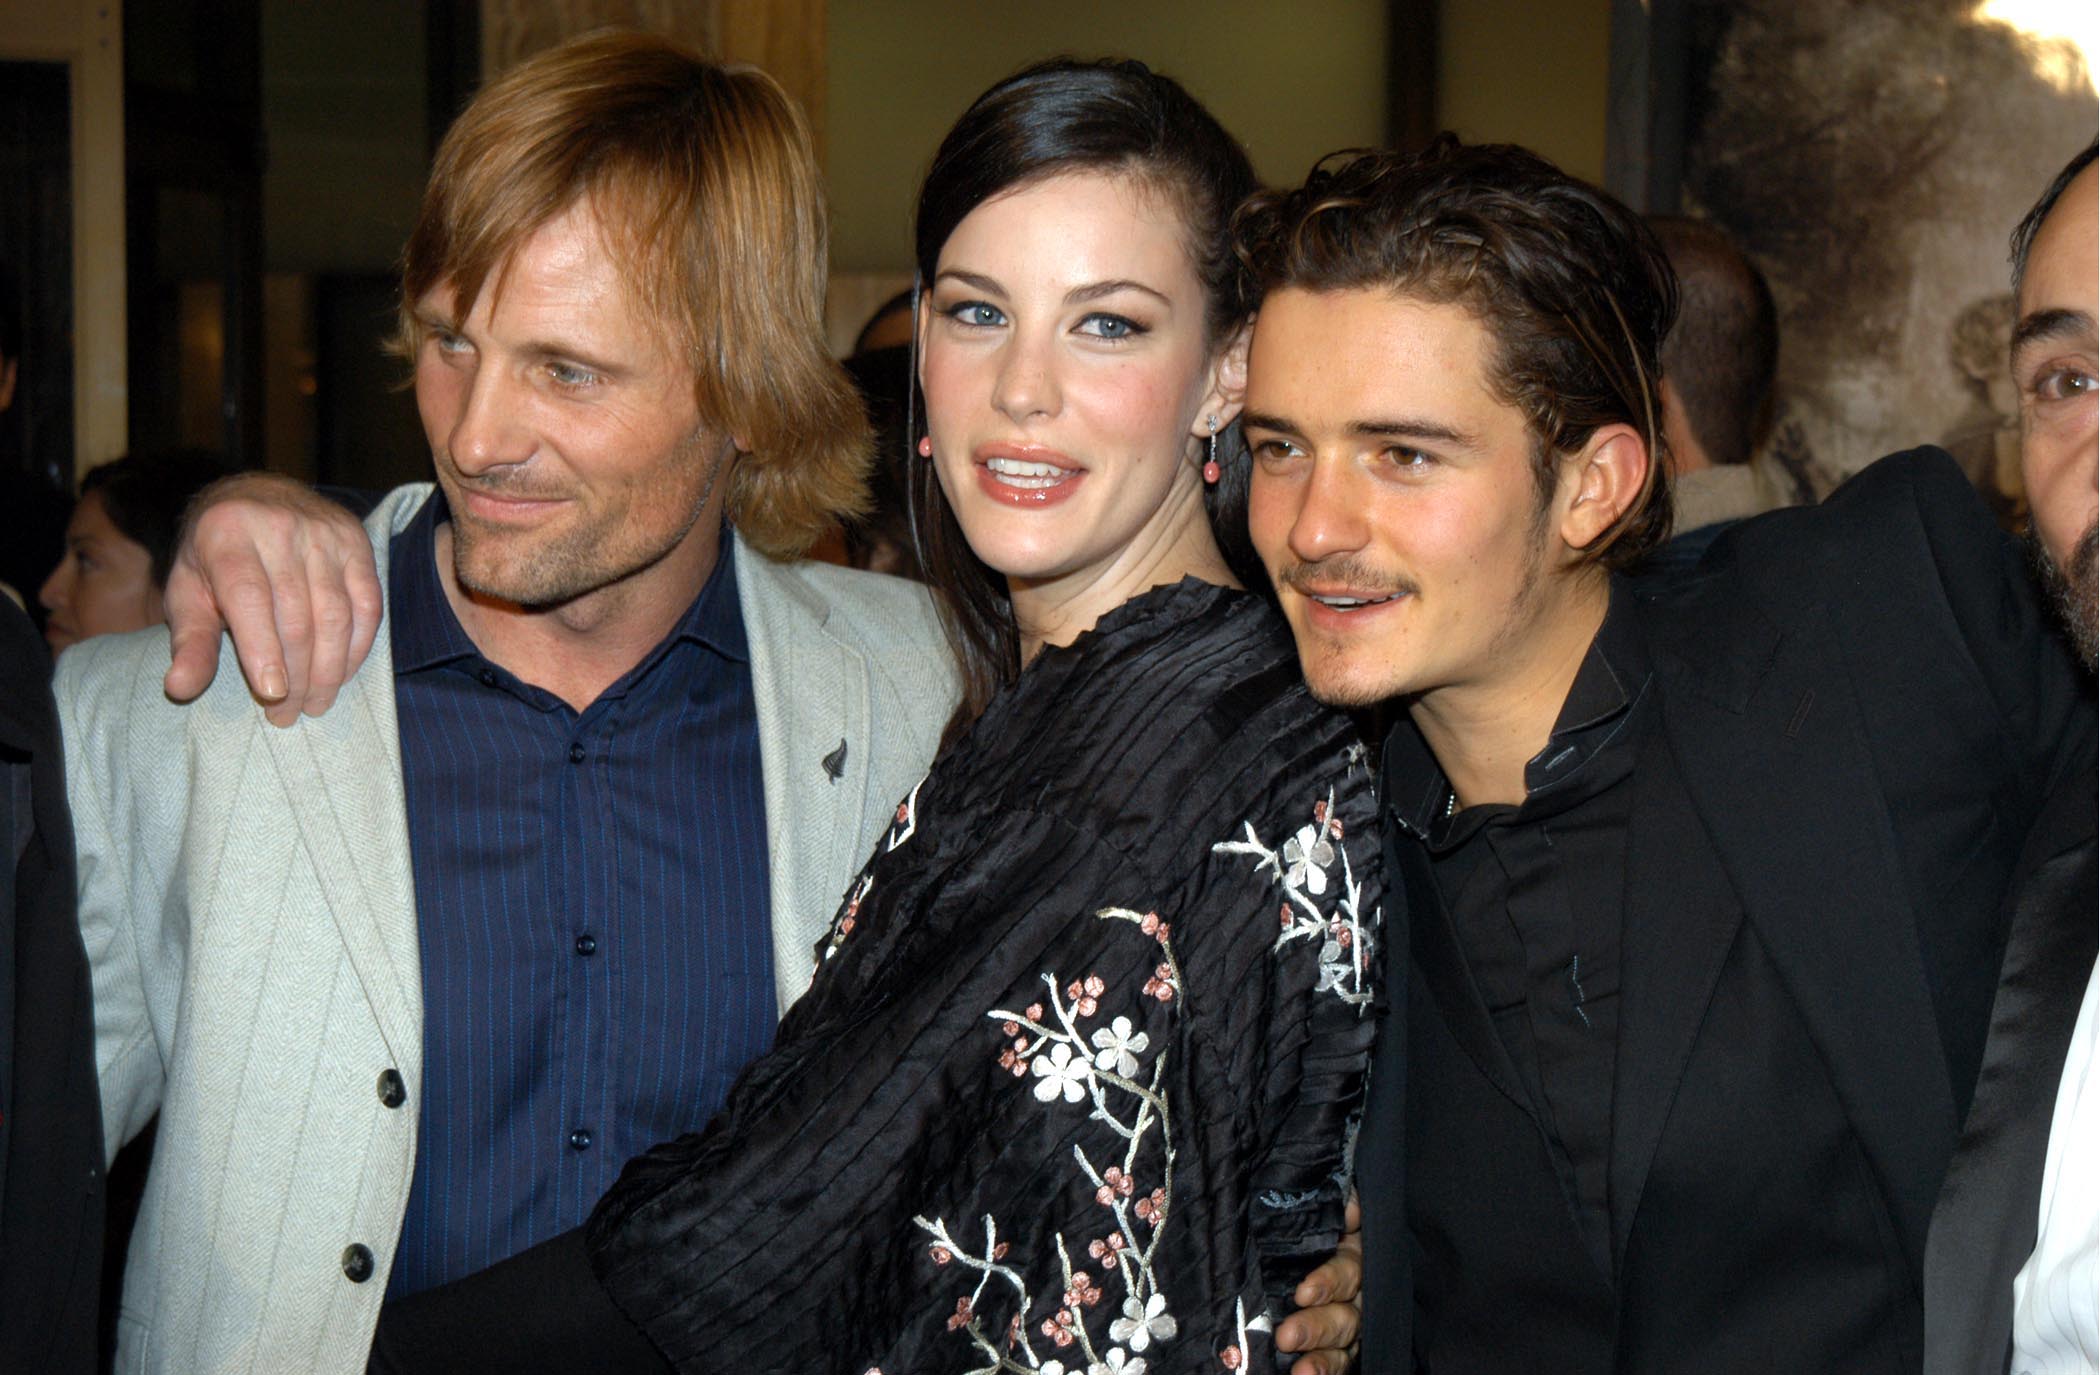 Liv Tyler, Viggo Mortensen, and Orlando Bloom at an event for The Lord of the Rings: The Two Towers (2002)